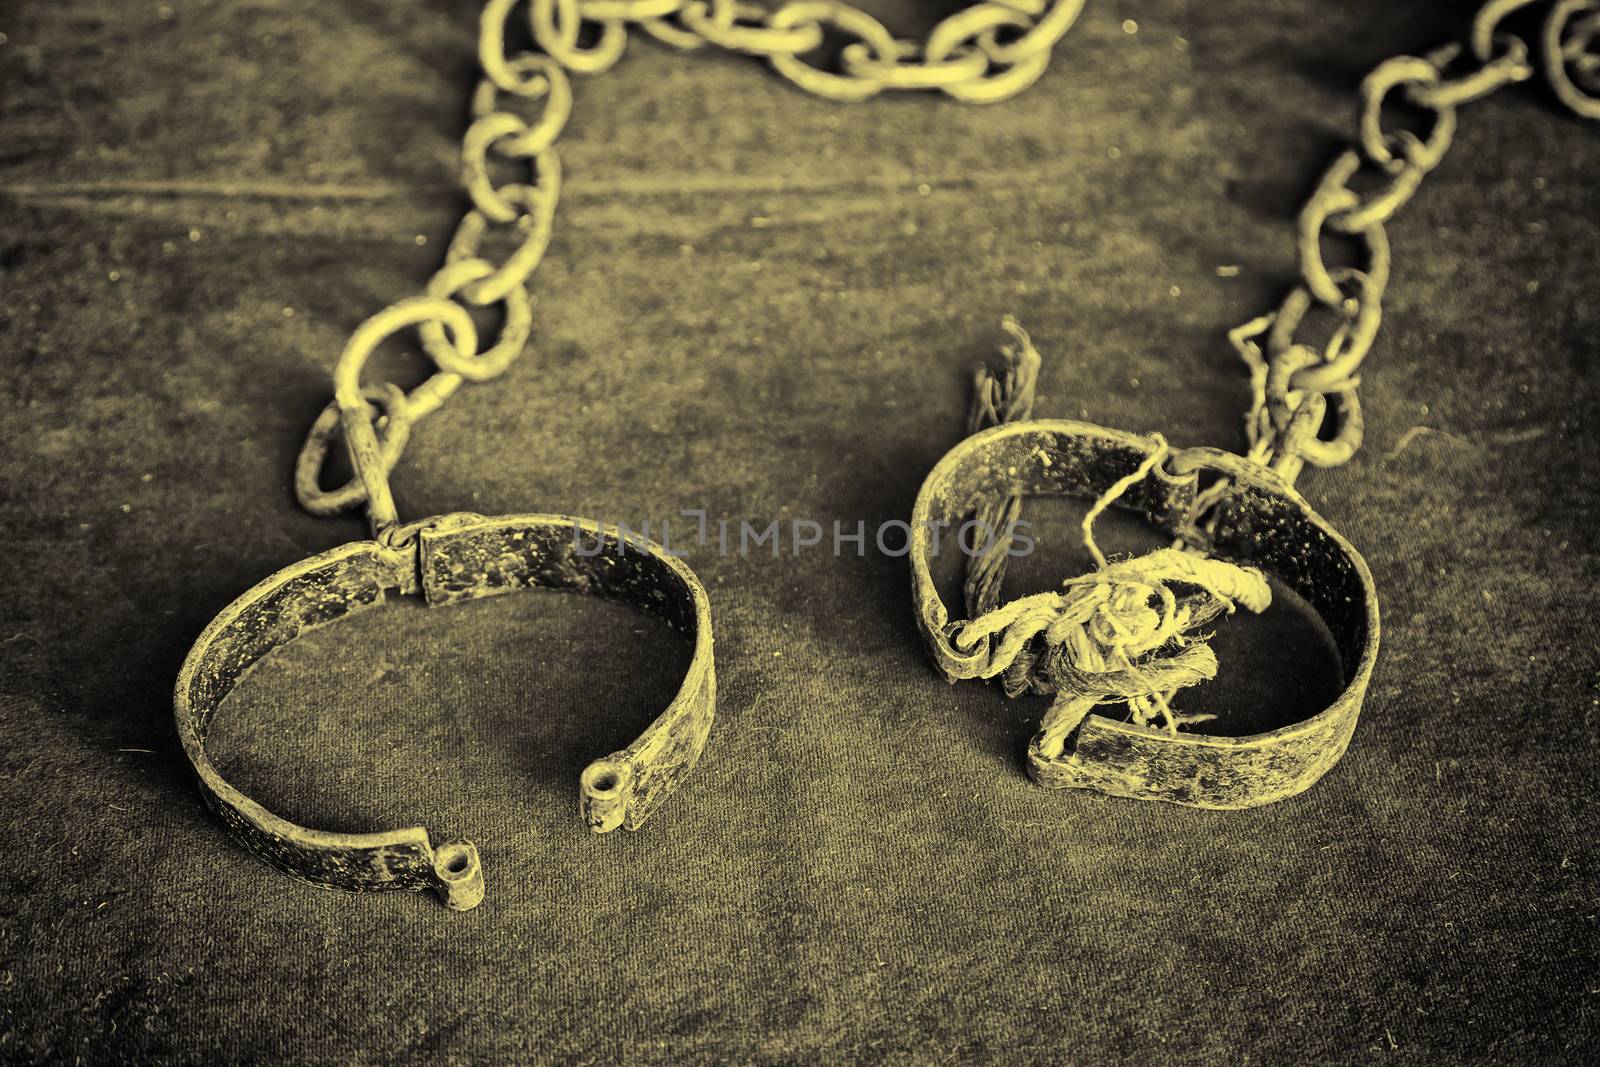 Ancient medieval handcuffs by esebene